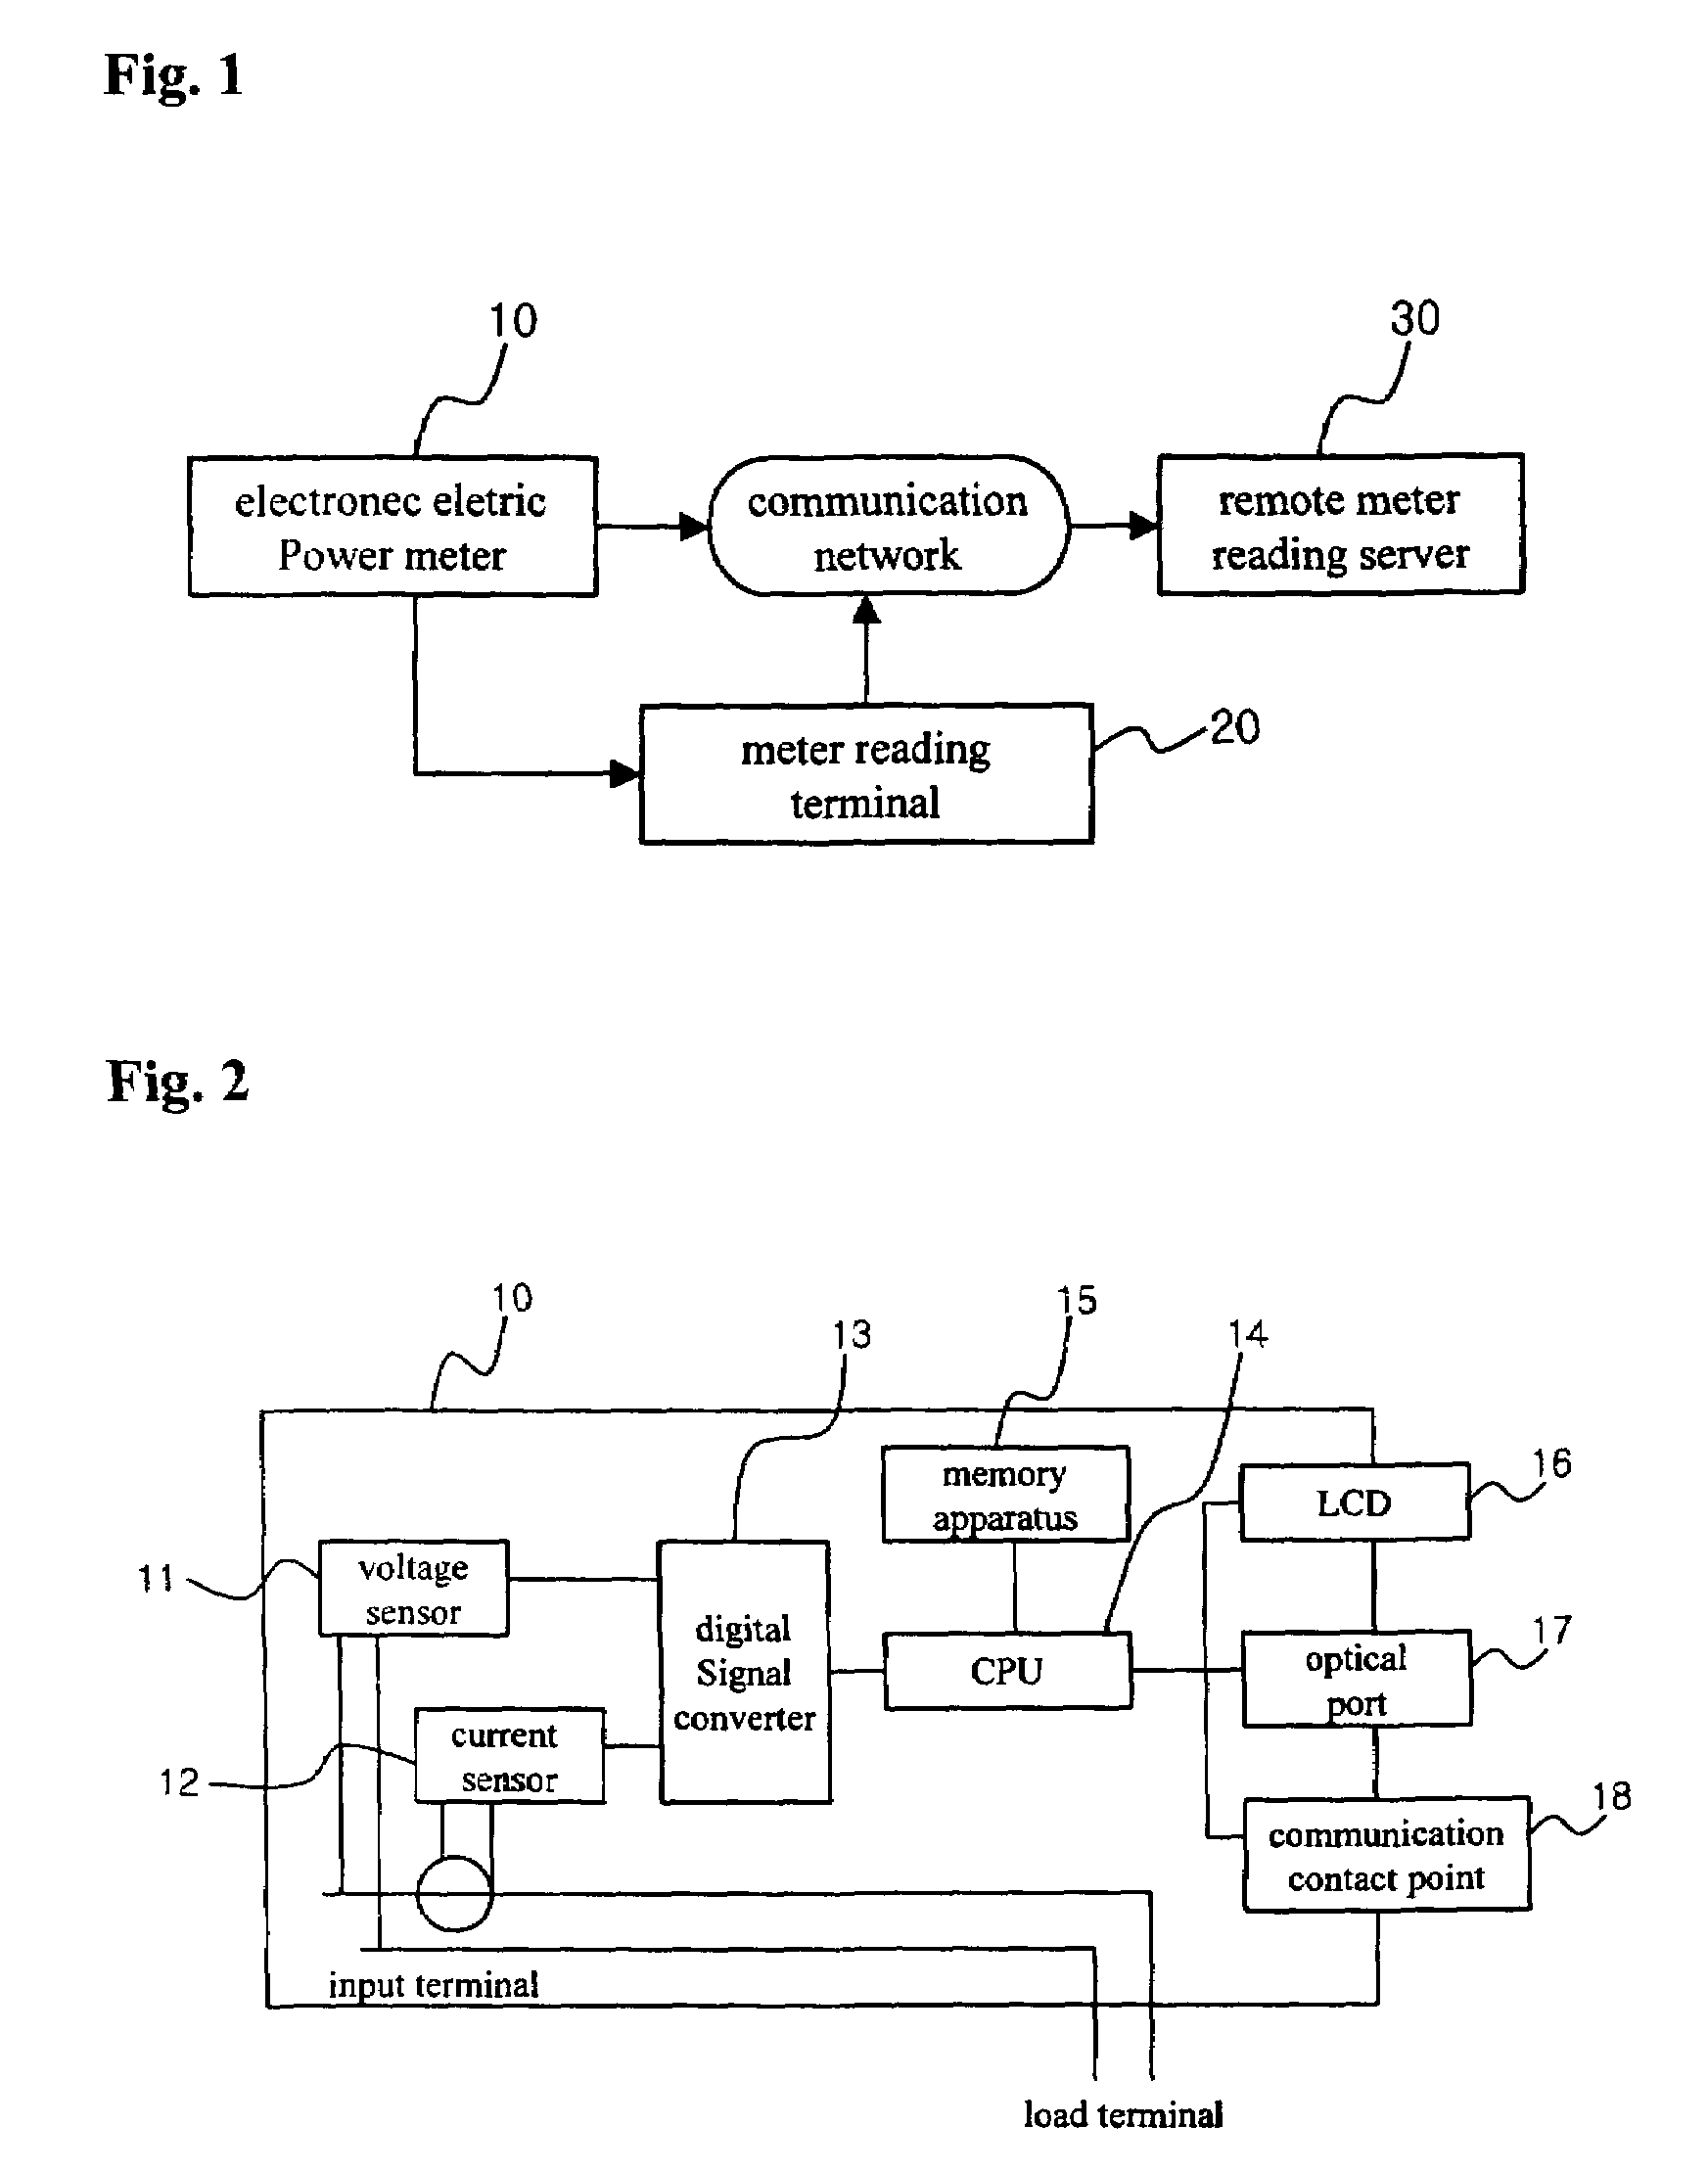 Remote meter reading system using grouped data structure